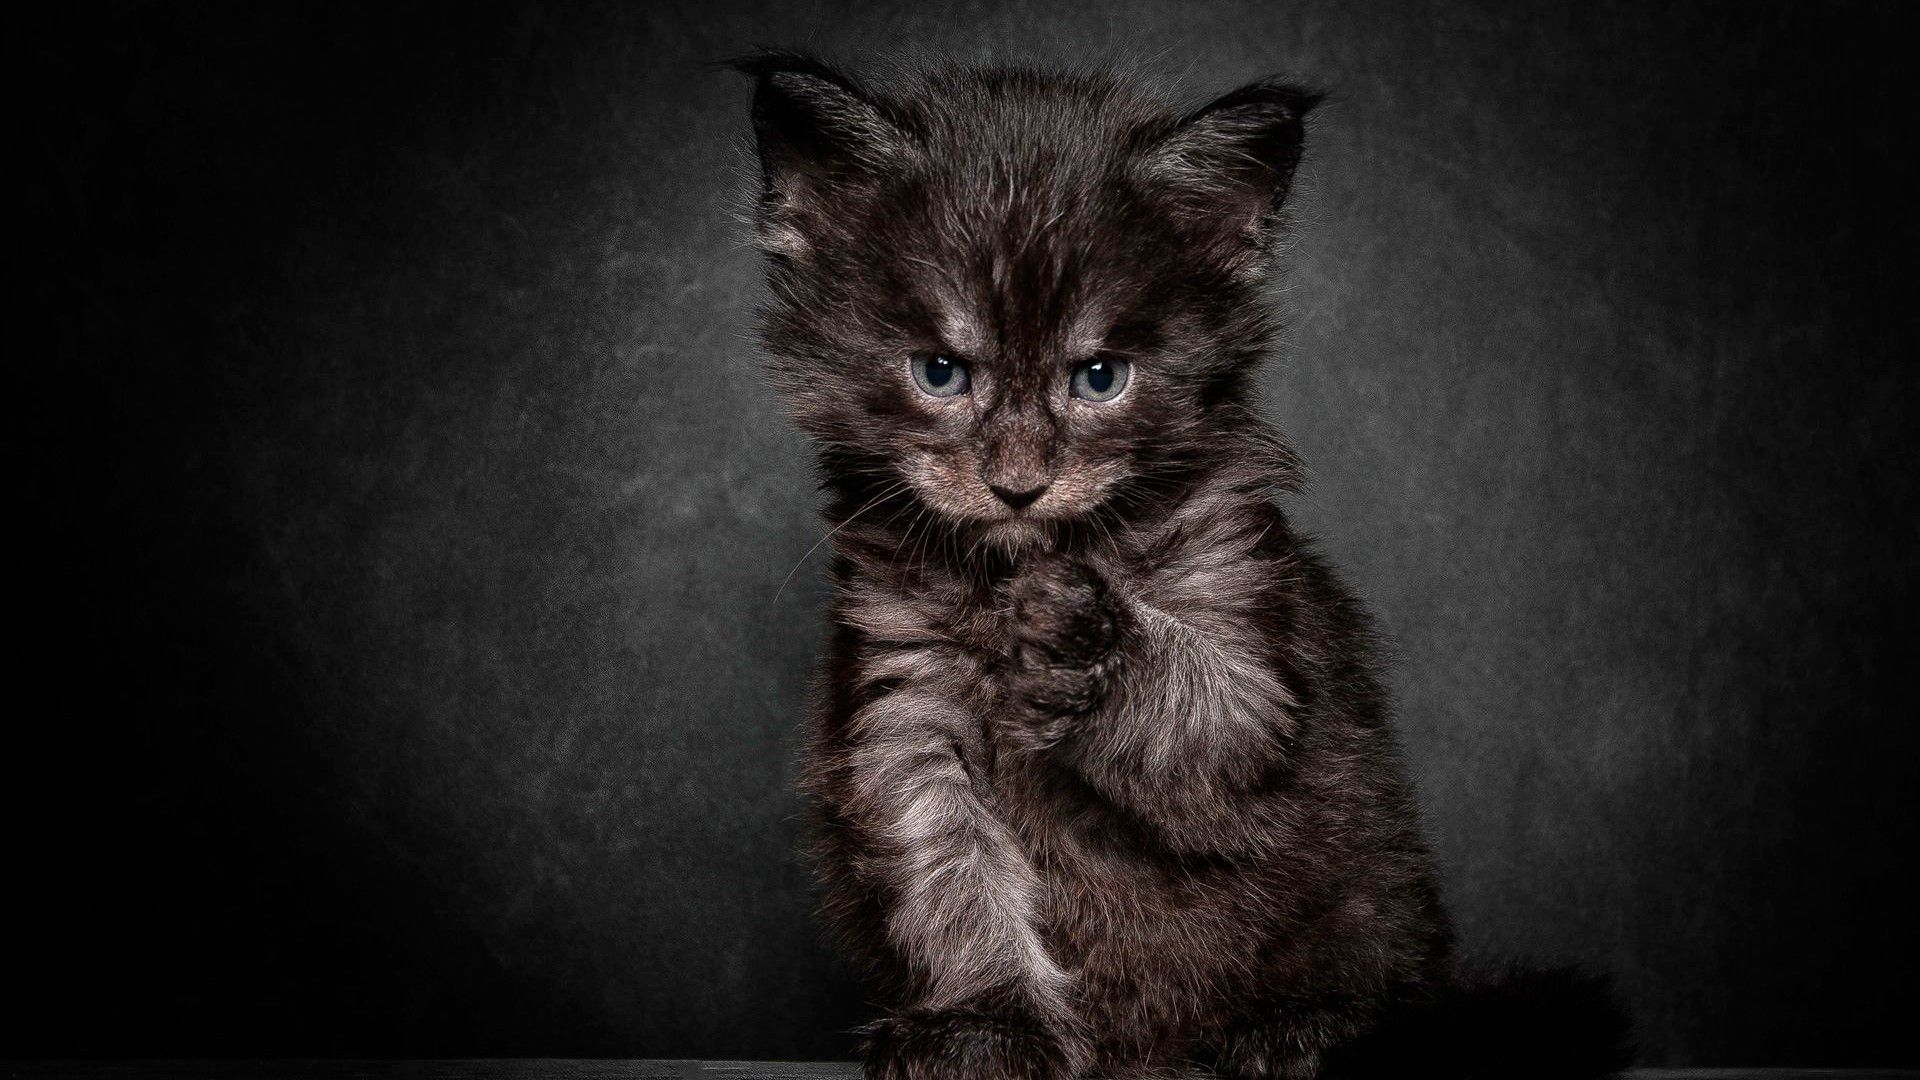 Angry black cat wallpaper and image, picture, photo